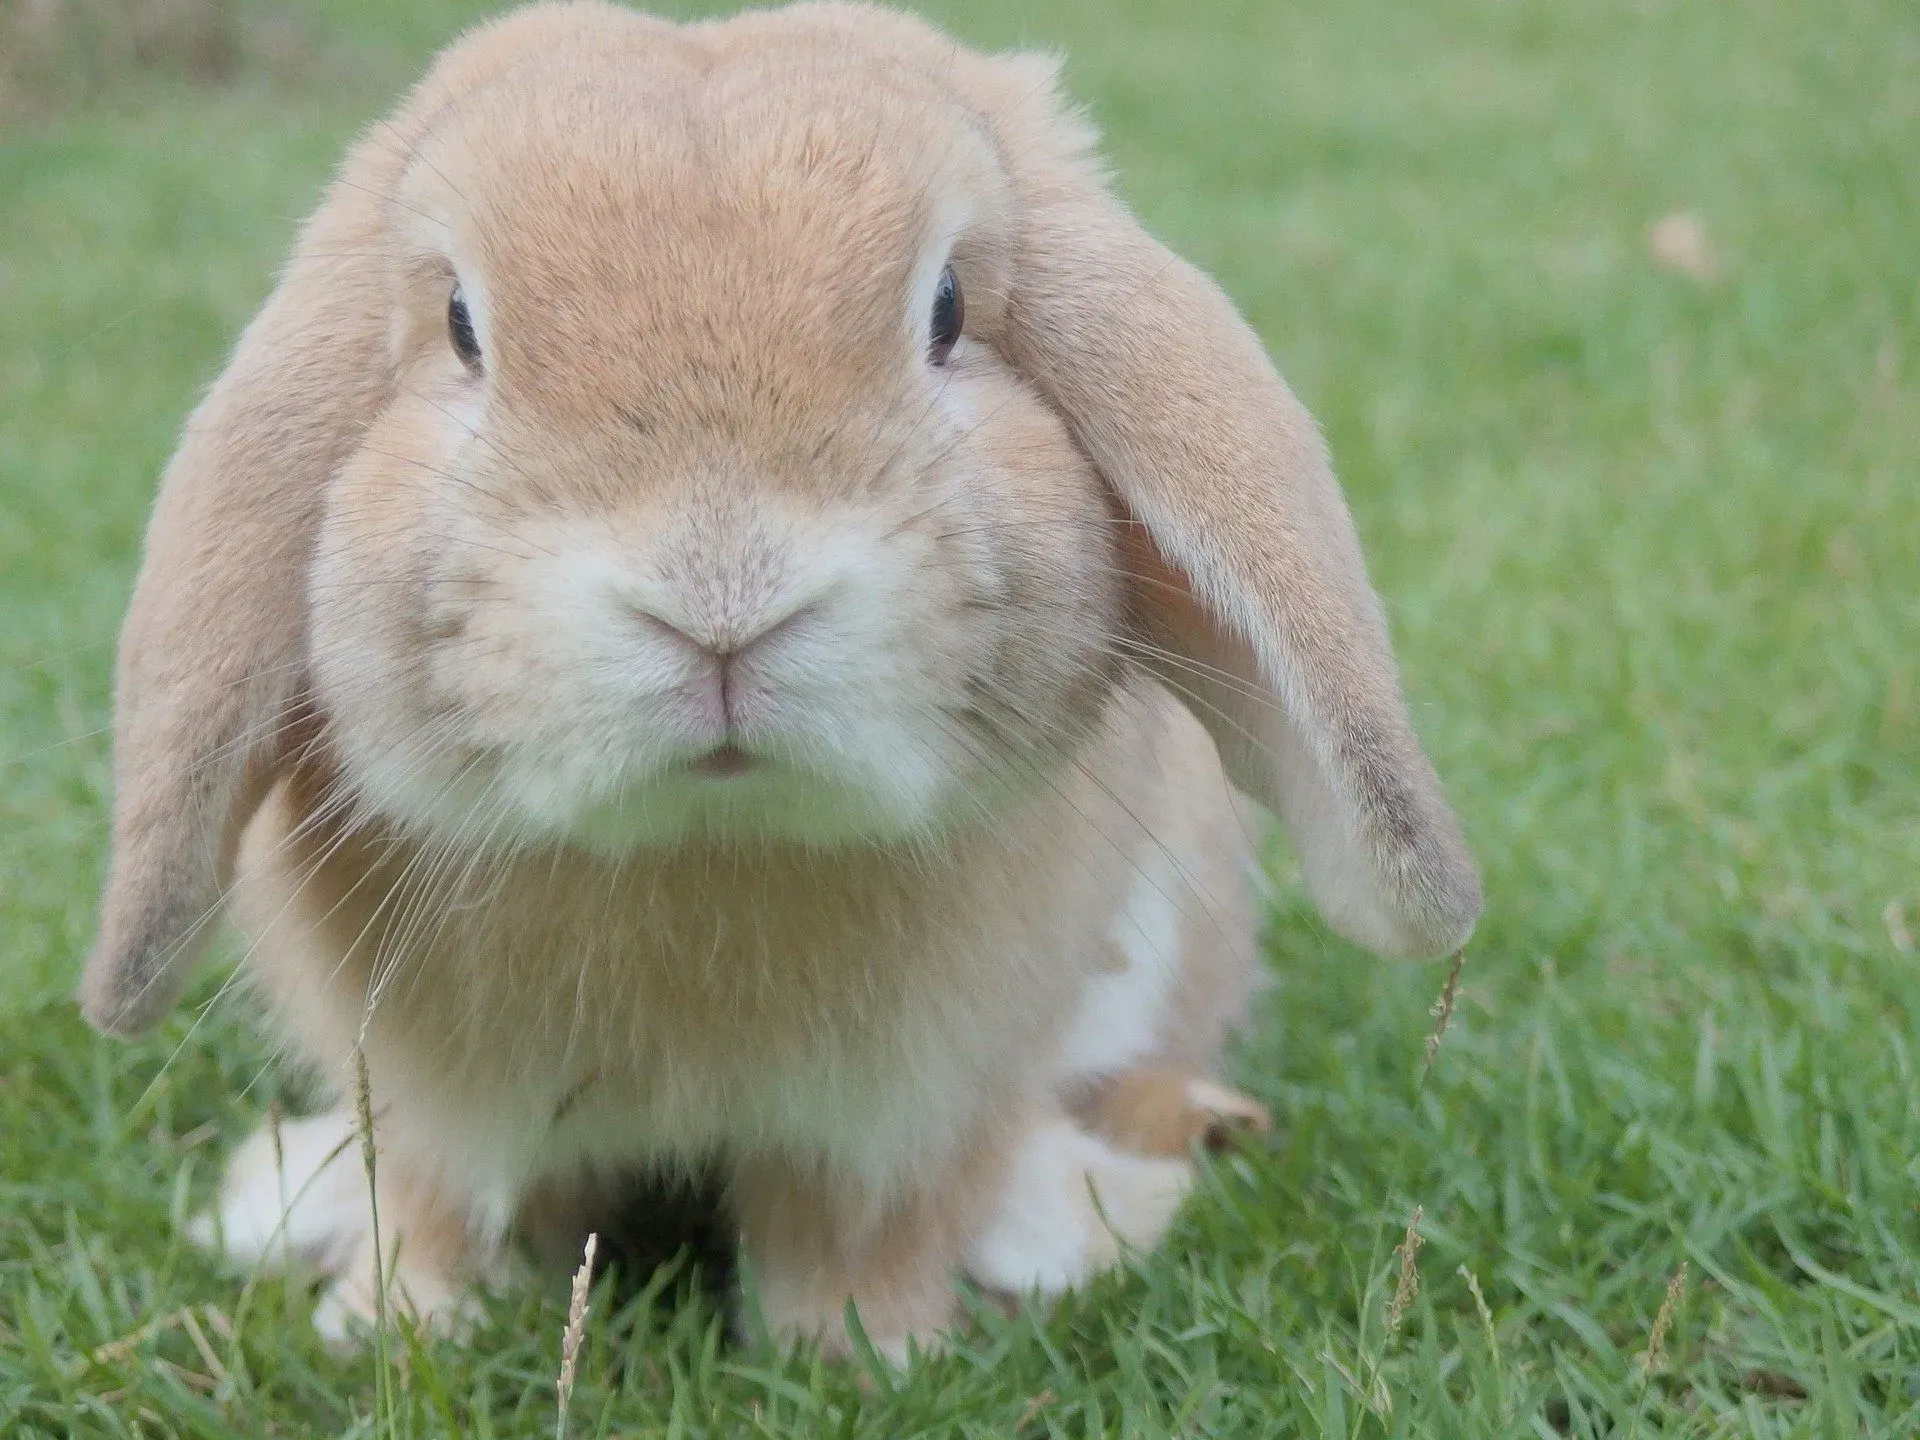 Learn more about can rabbits eat kale? And other interesting rabbit facts.